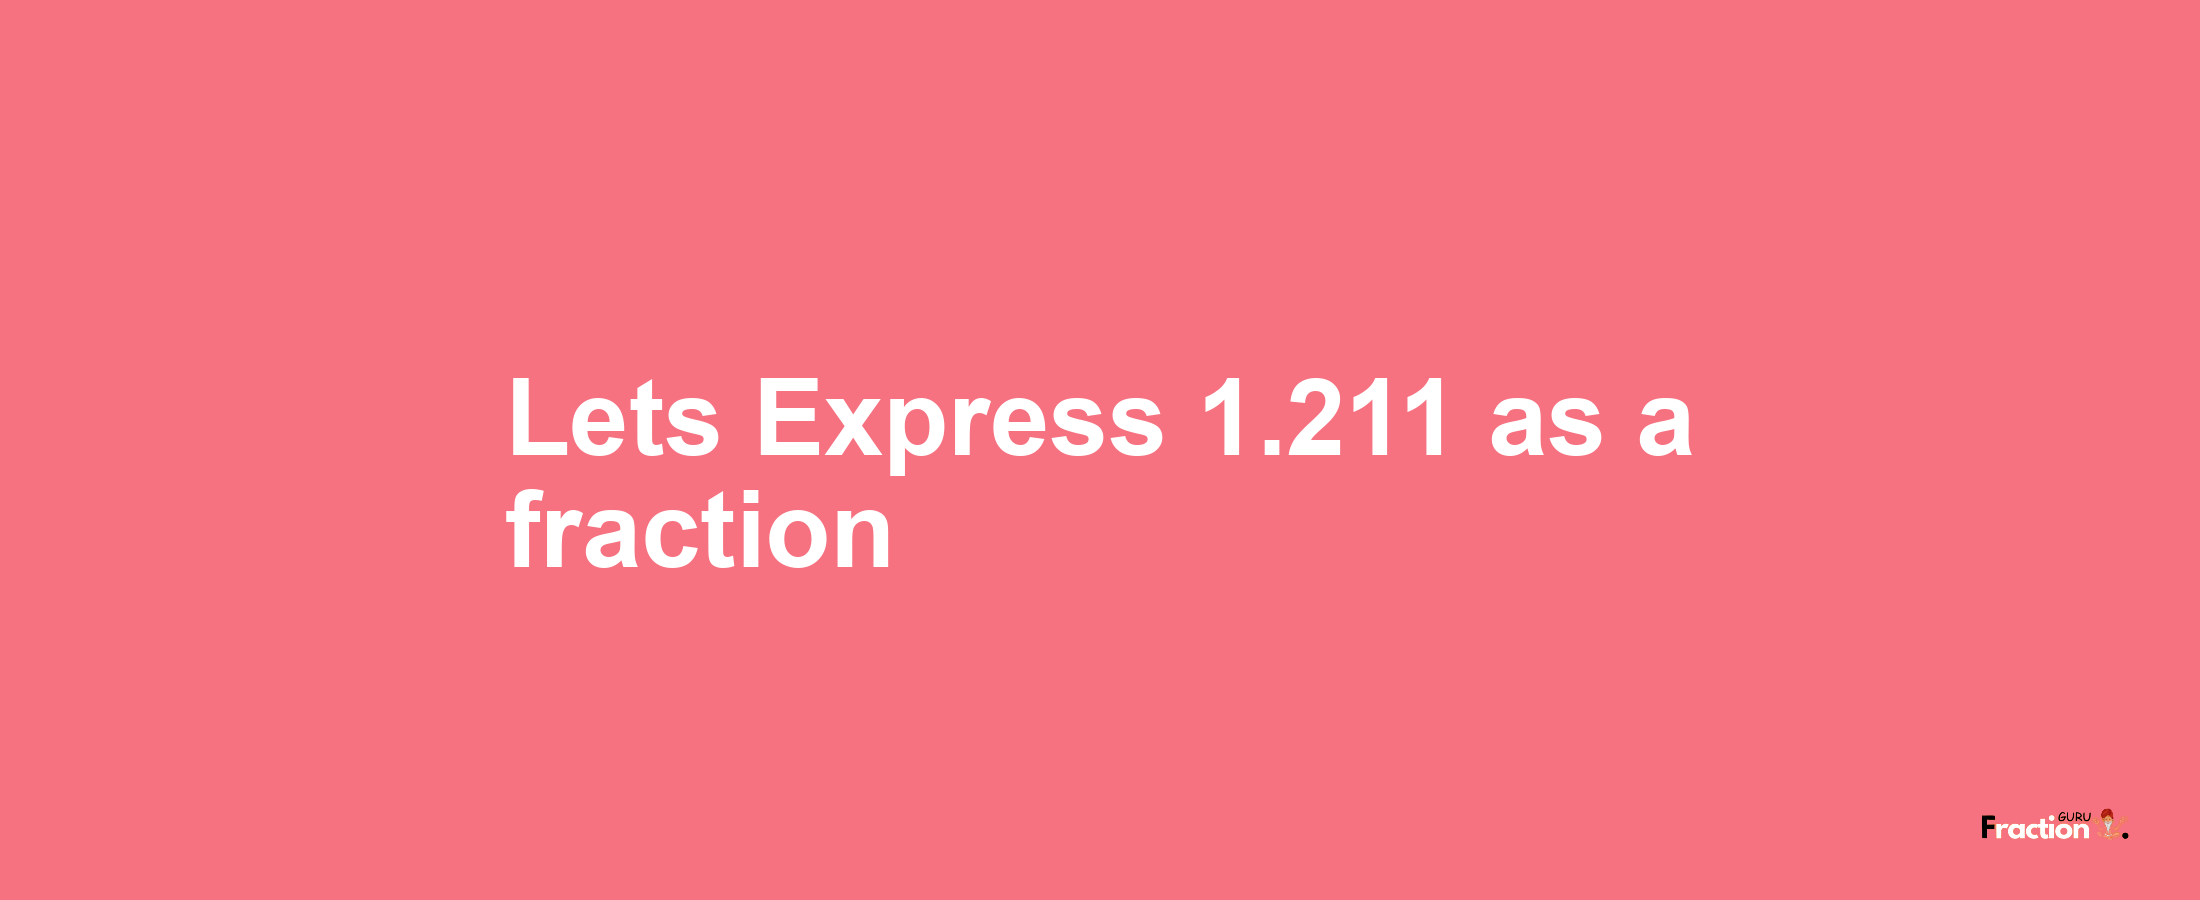 Lets Express 1.211 as afraction